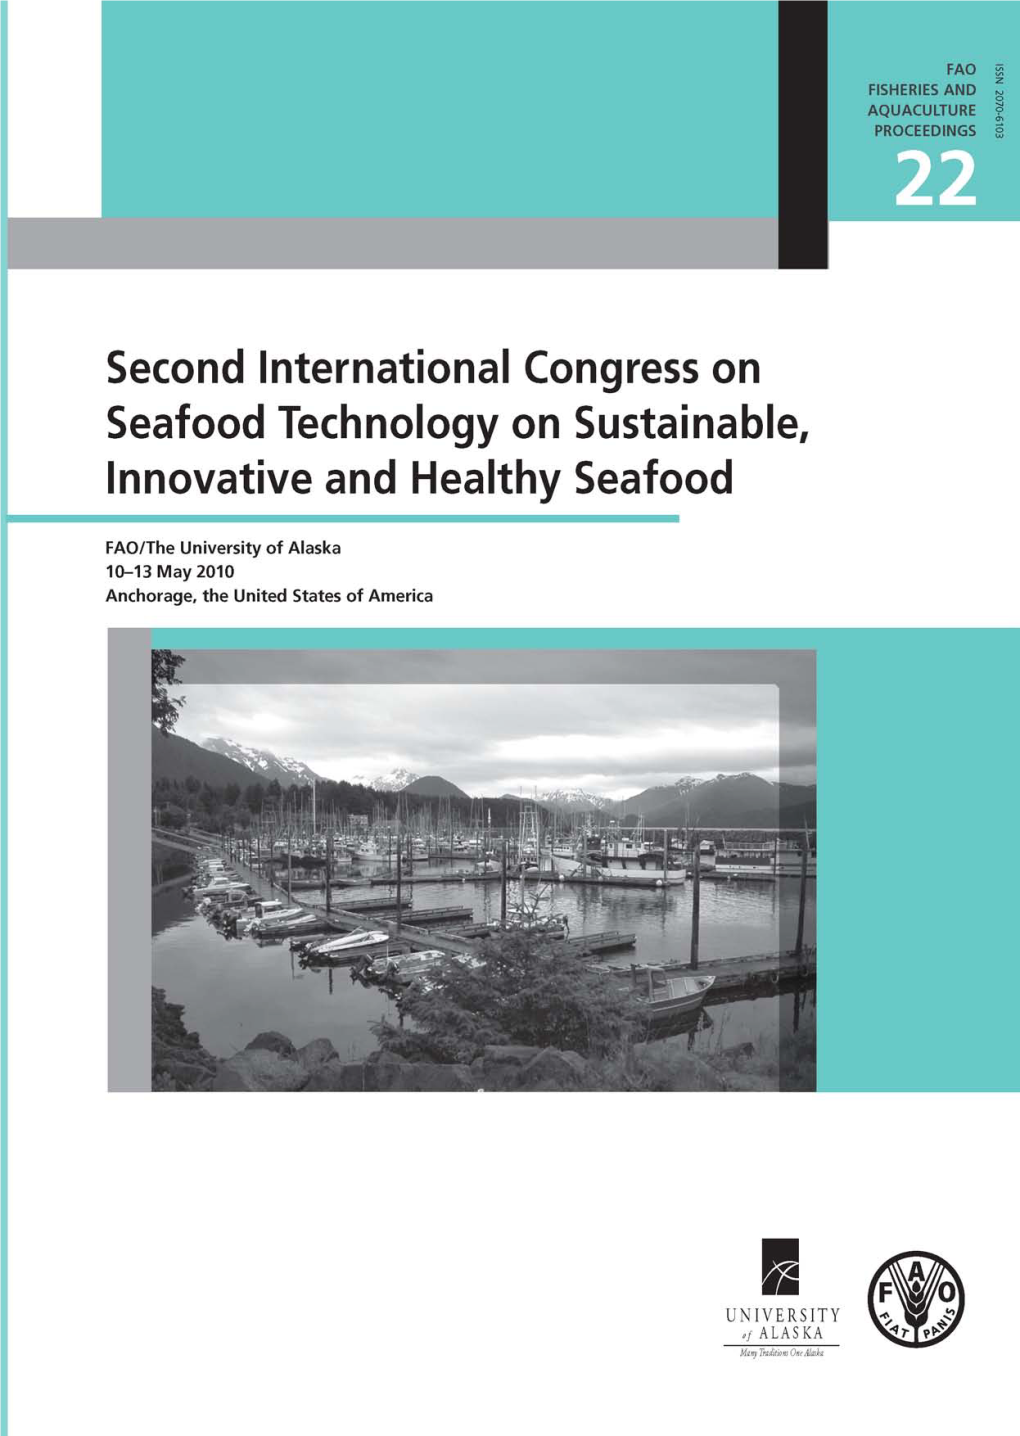 International Congress on Seafood Technology on Sustainable, Innovative and Healthy Seafood. FAO/The University of Alaska. 10-13